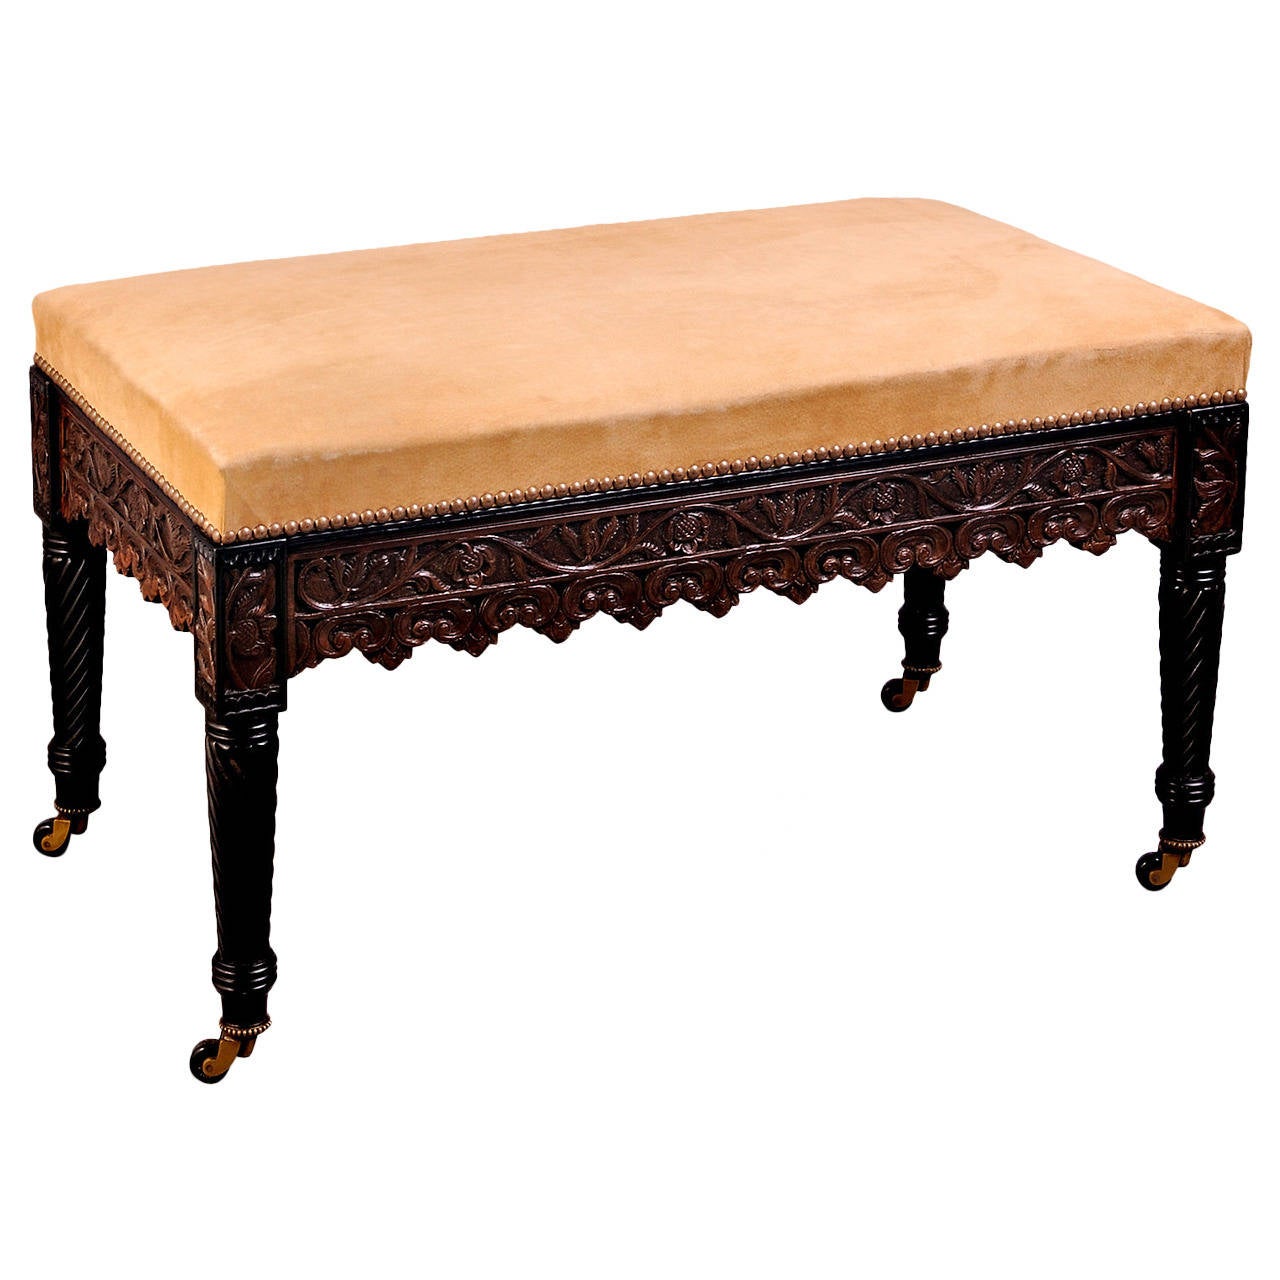 Regency Carved Ebony and Anglo-Indian Hardwood Stool in Antiquarian Taste For Sale